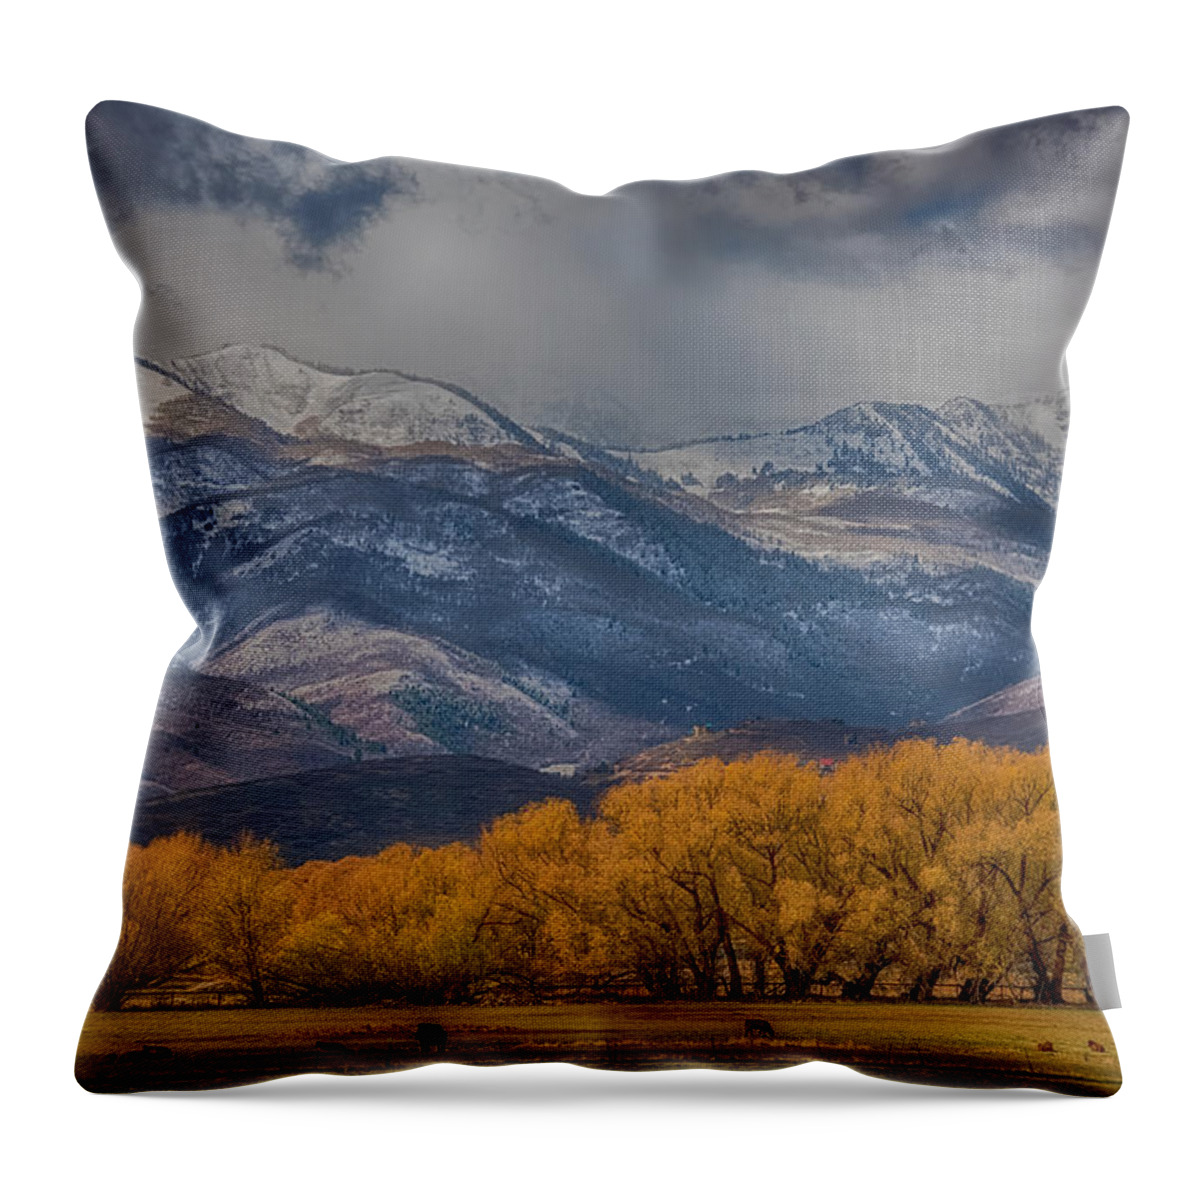 Pasture Throw Pillow featuring the photograph Cows Trees Mountains and Clouds by Paul Freidlund